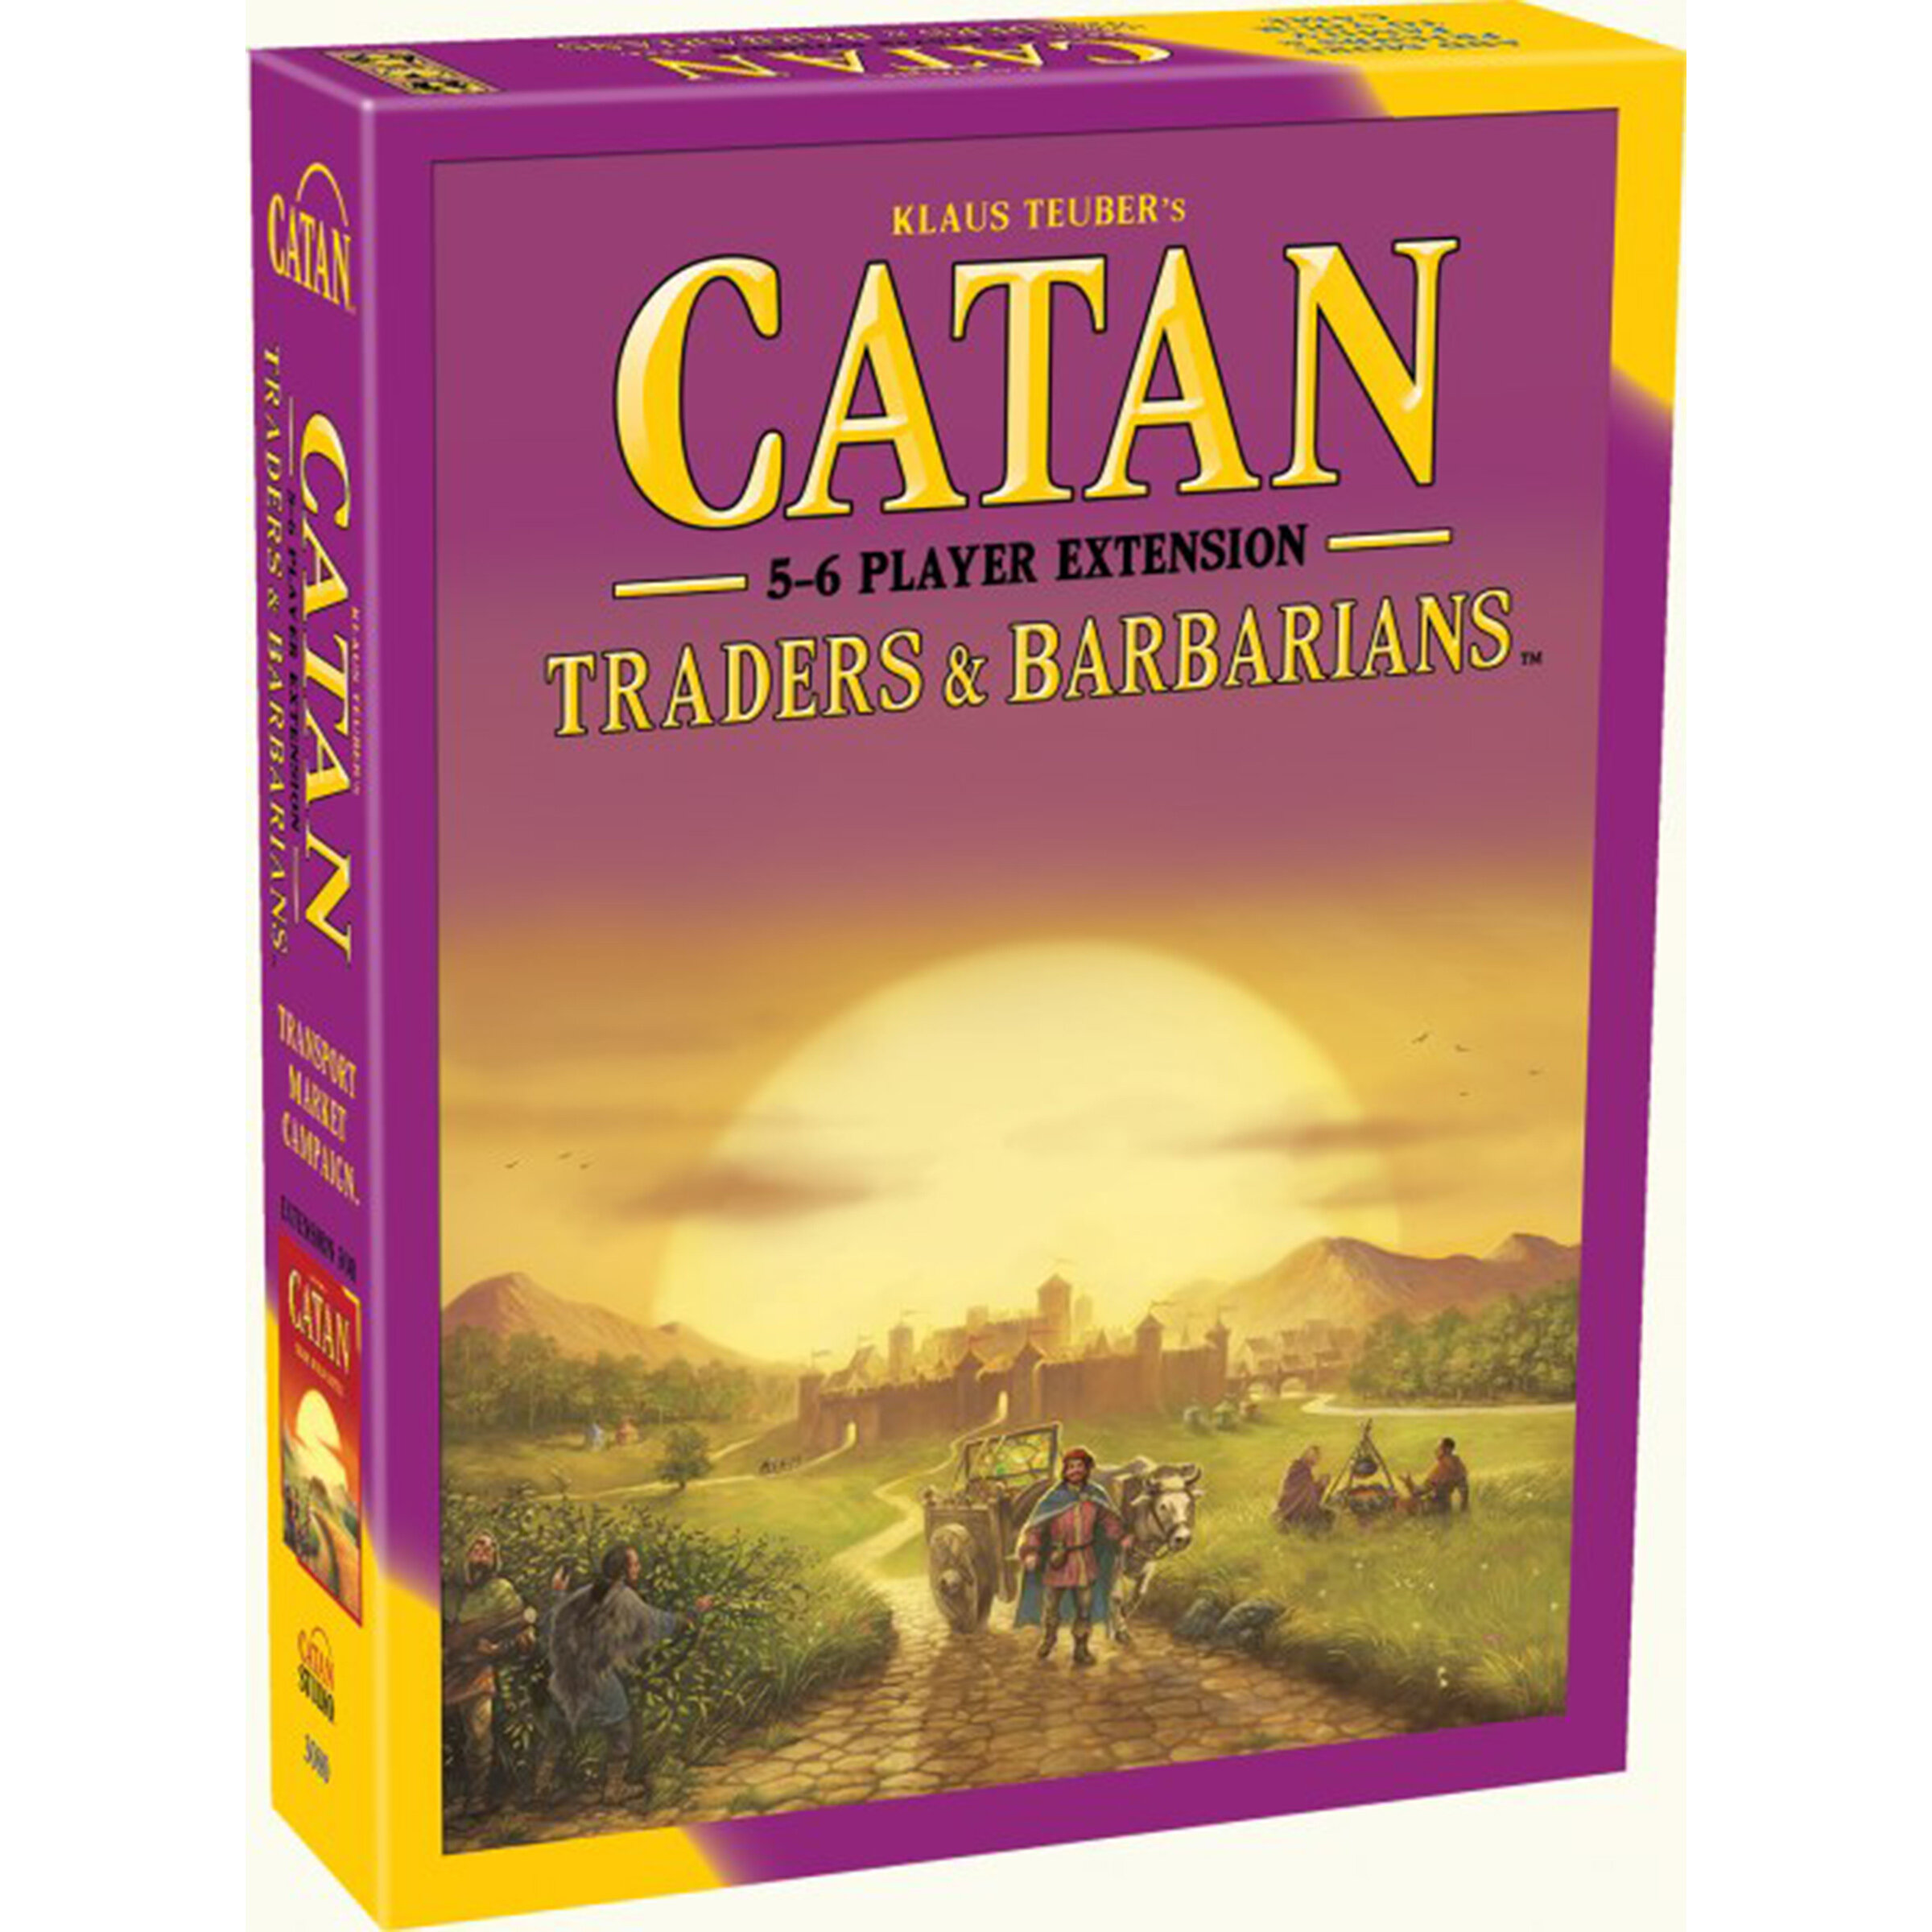 Catan Traders and Barbarians 5-6 Player Extension 